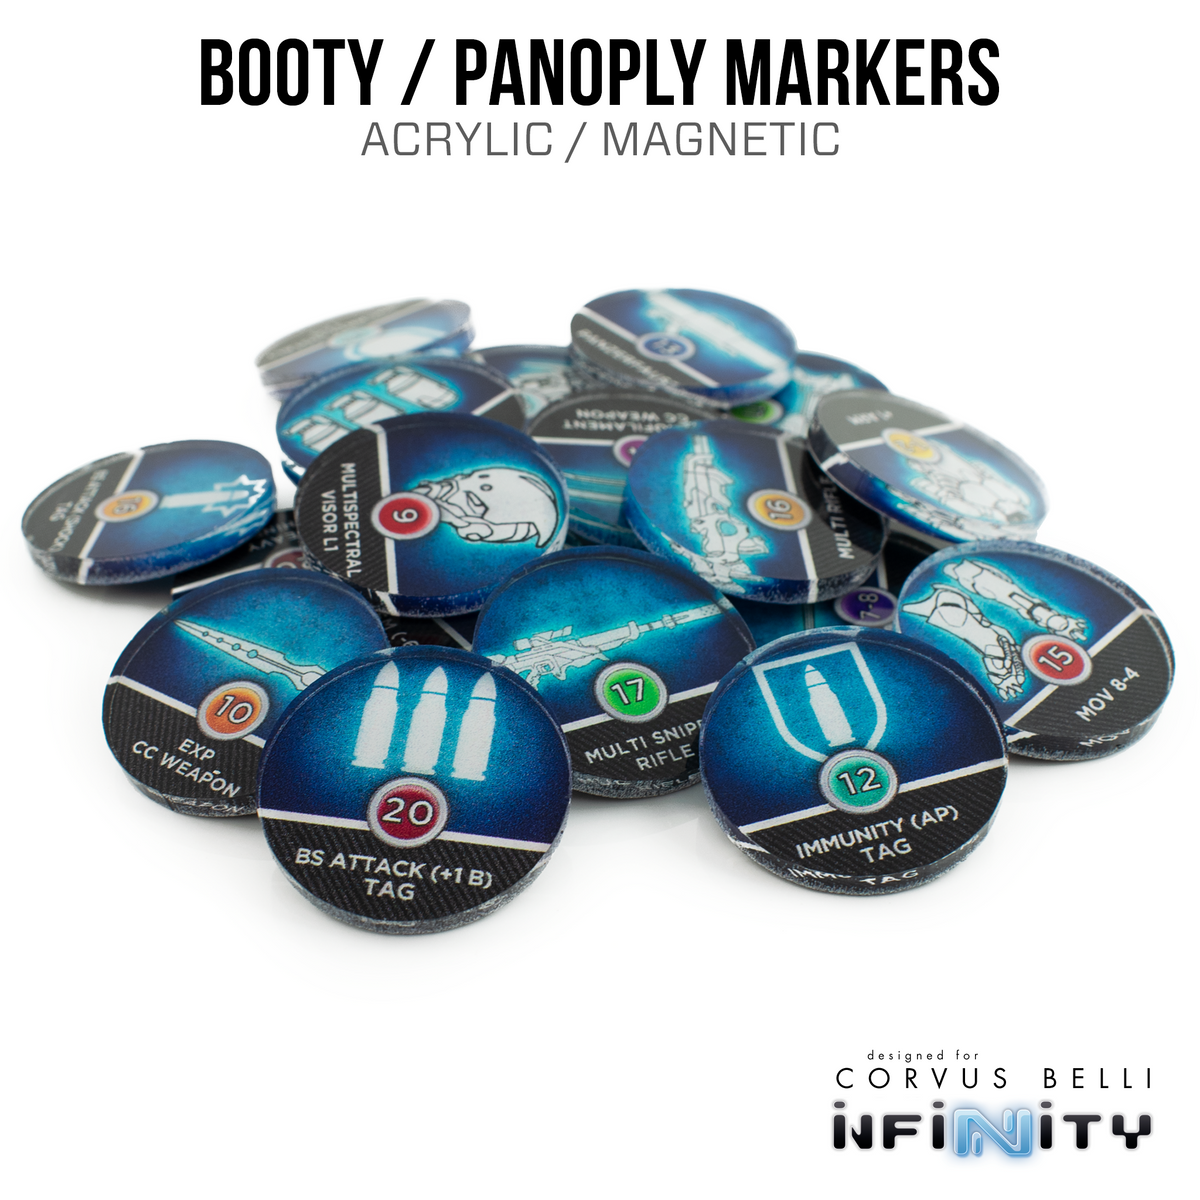 Booty / Panoply Markers